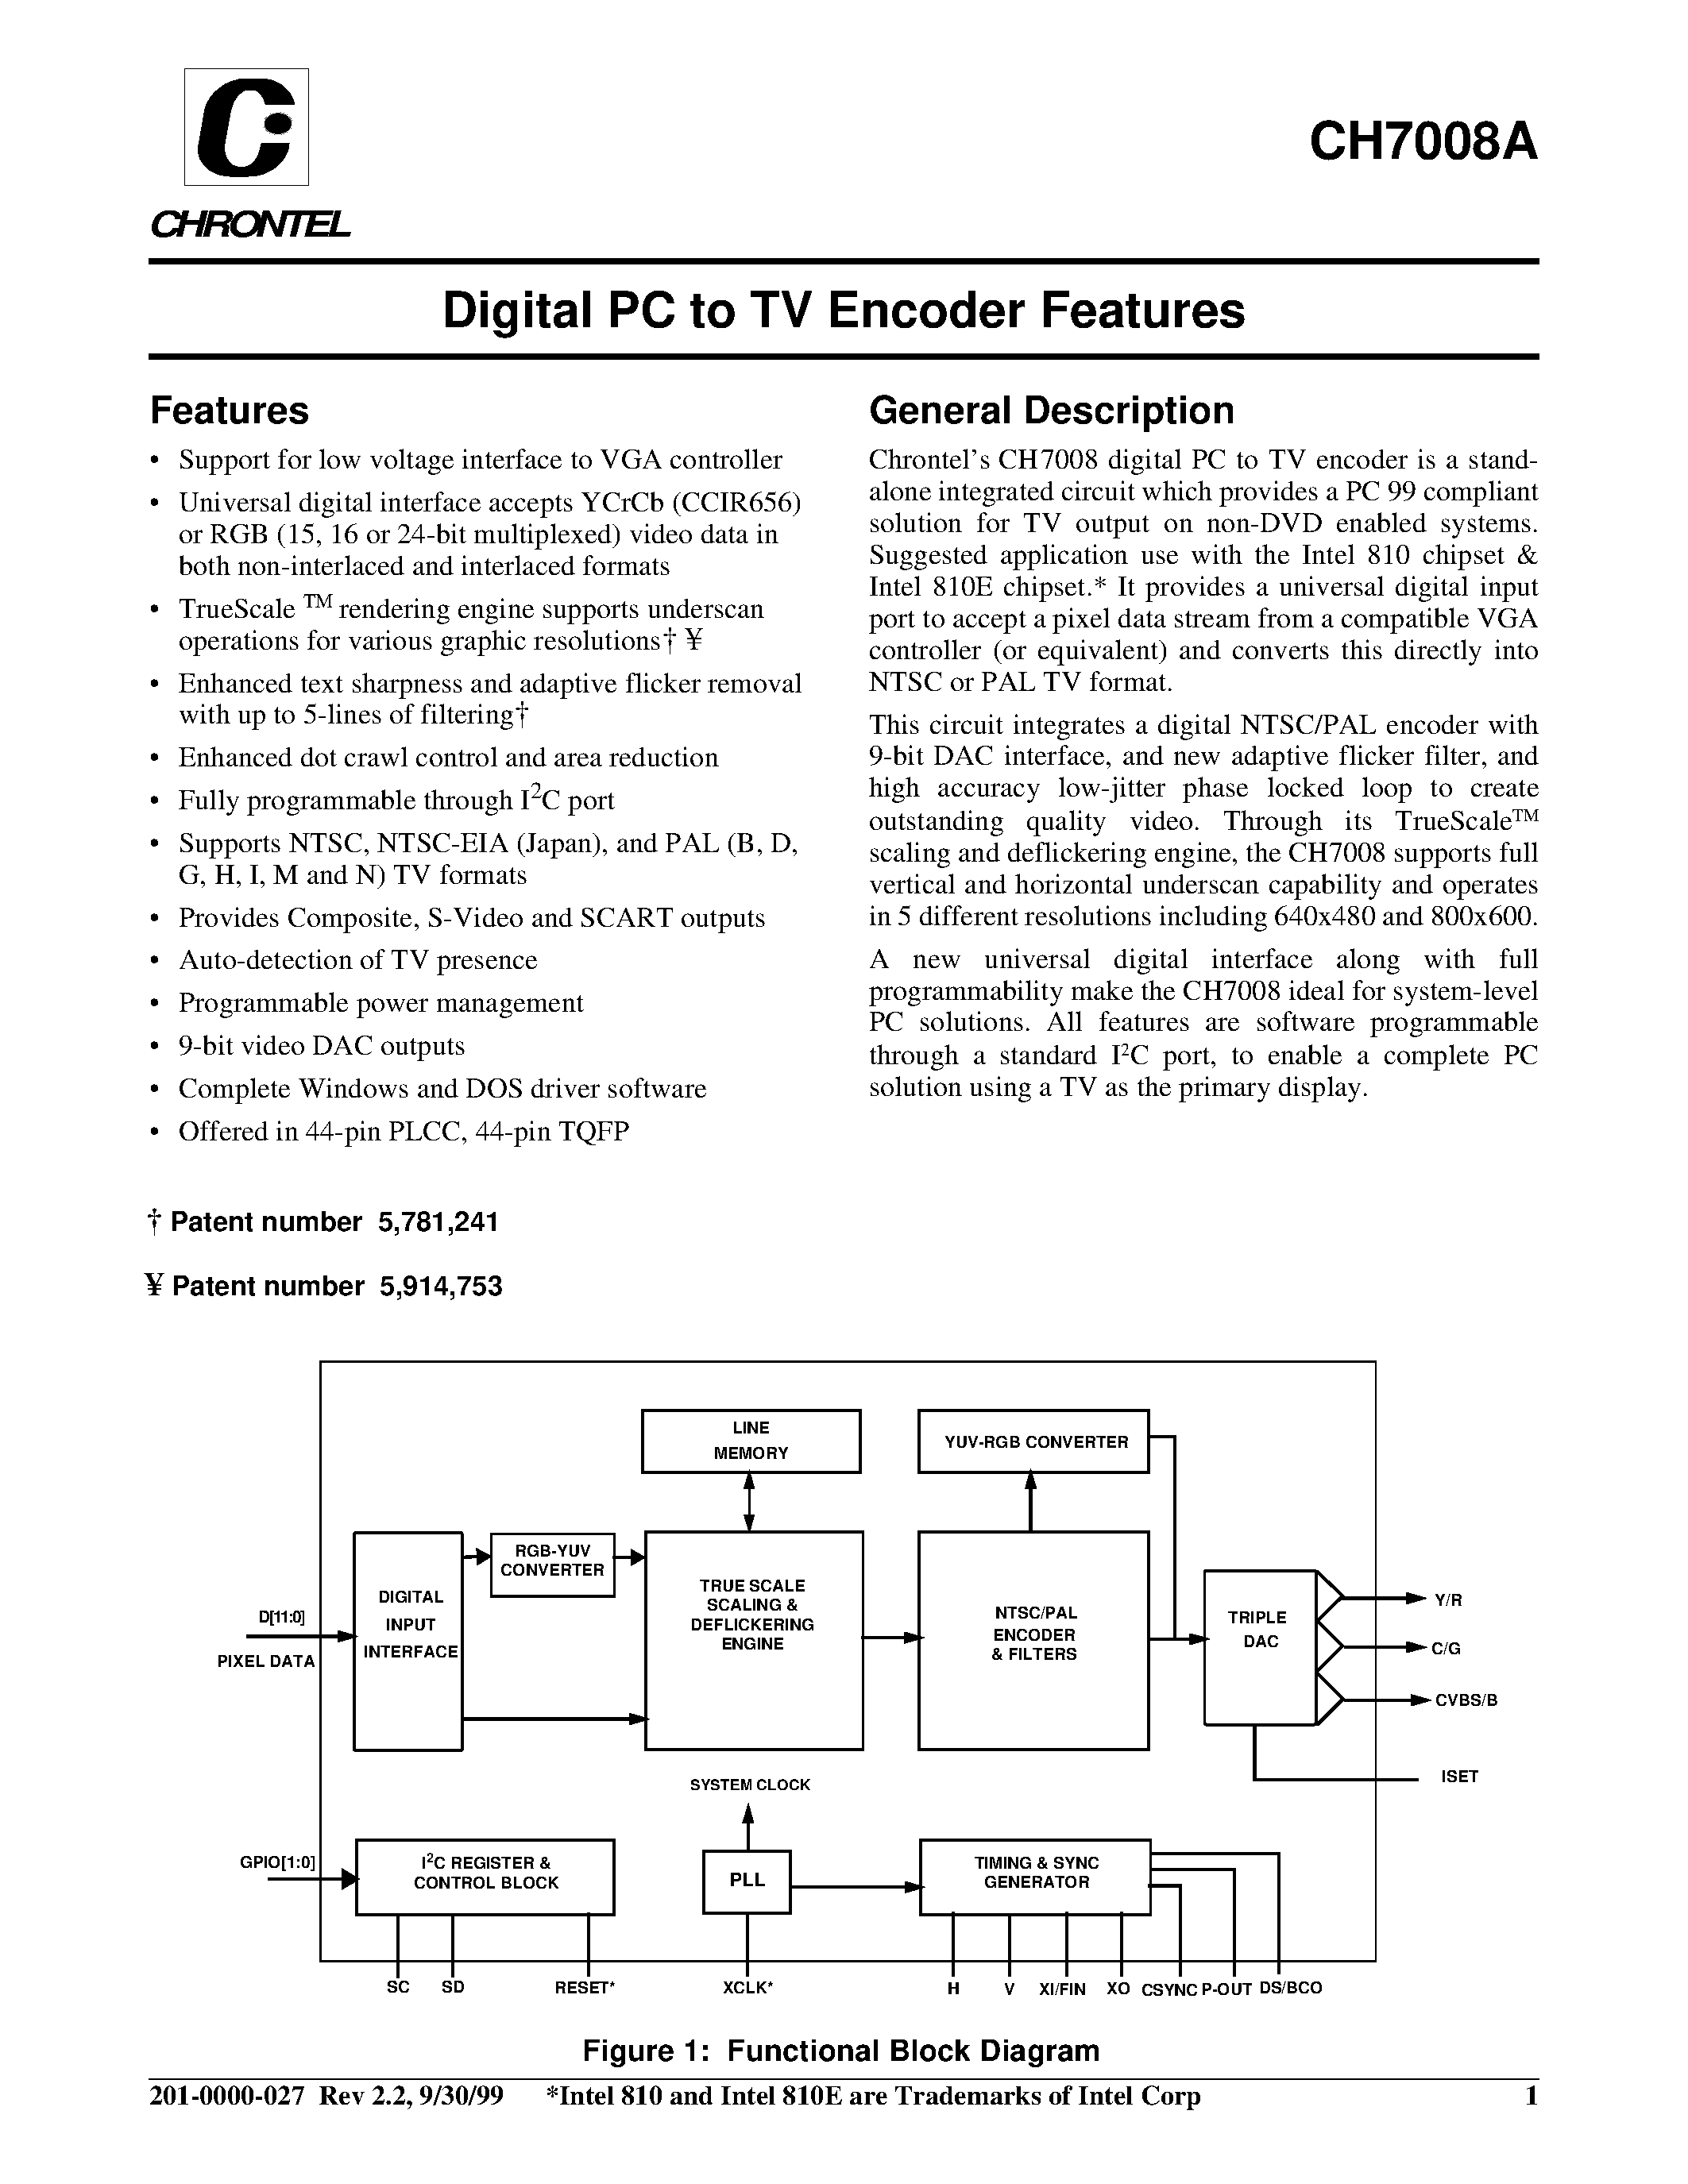 Datasheet CH7008A-V - Digital PC to TV Encoder Features page 1